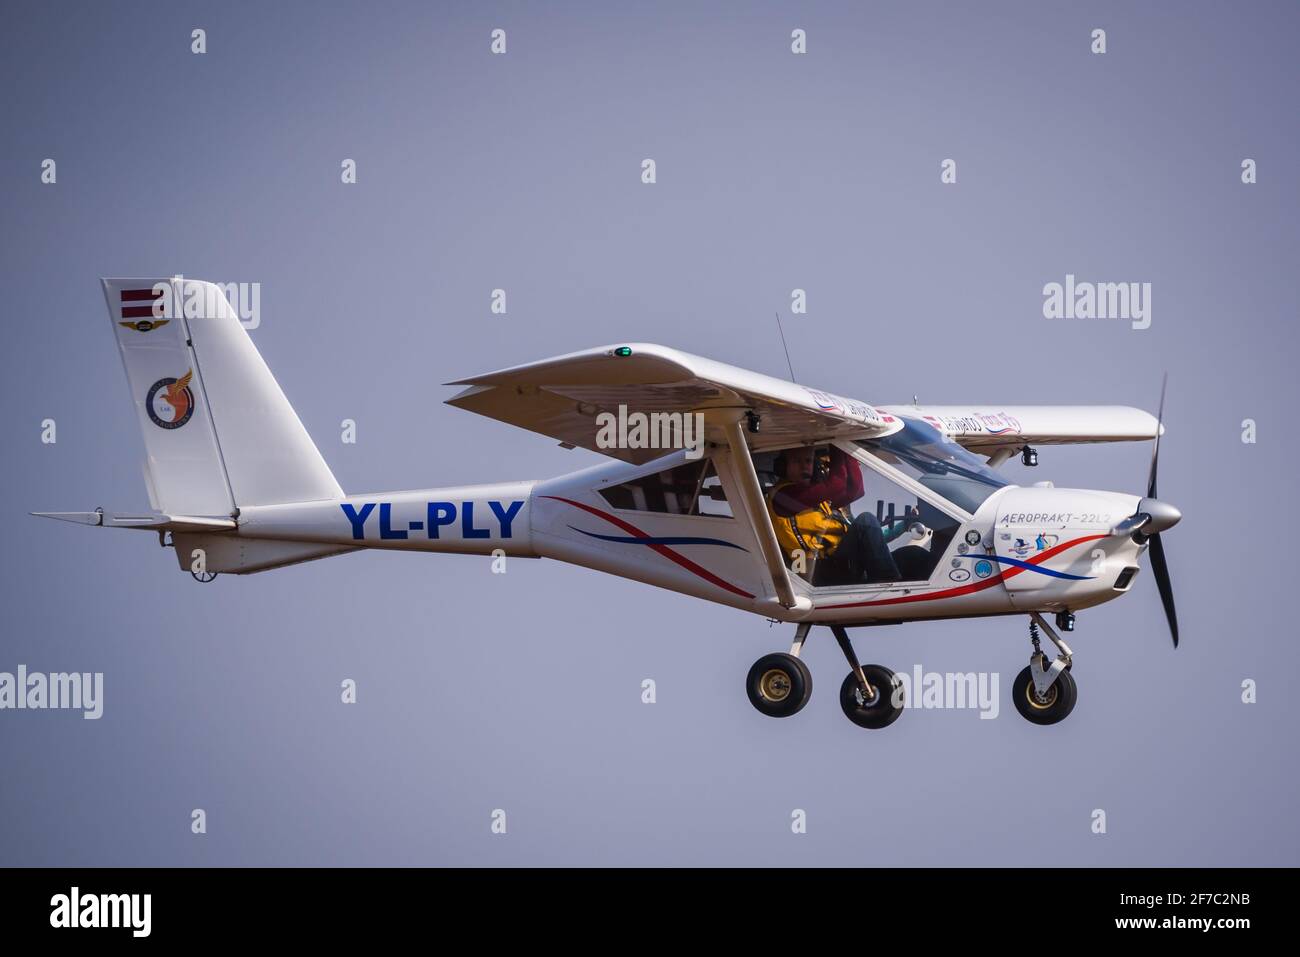 A DAZI, LATVIA. 27th March 2021. Aeropakt A22 L2 Foxbat YL PLY airplane flying in the sky. Stock Photo